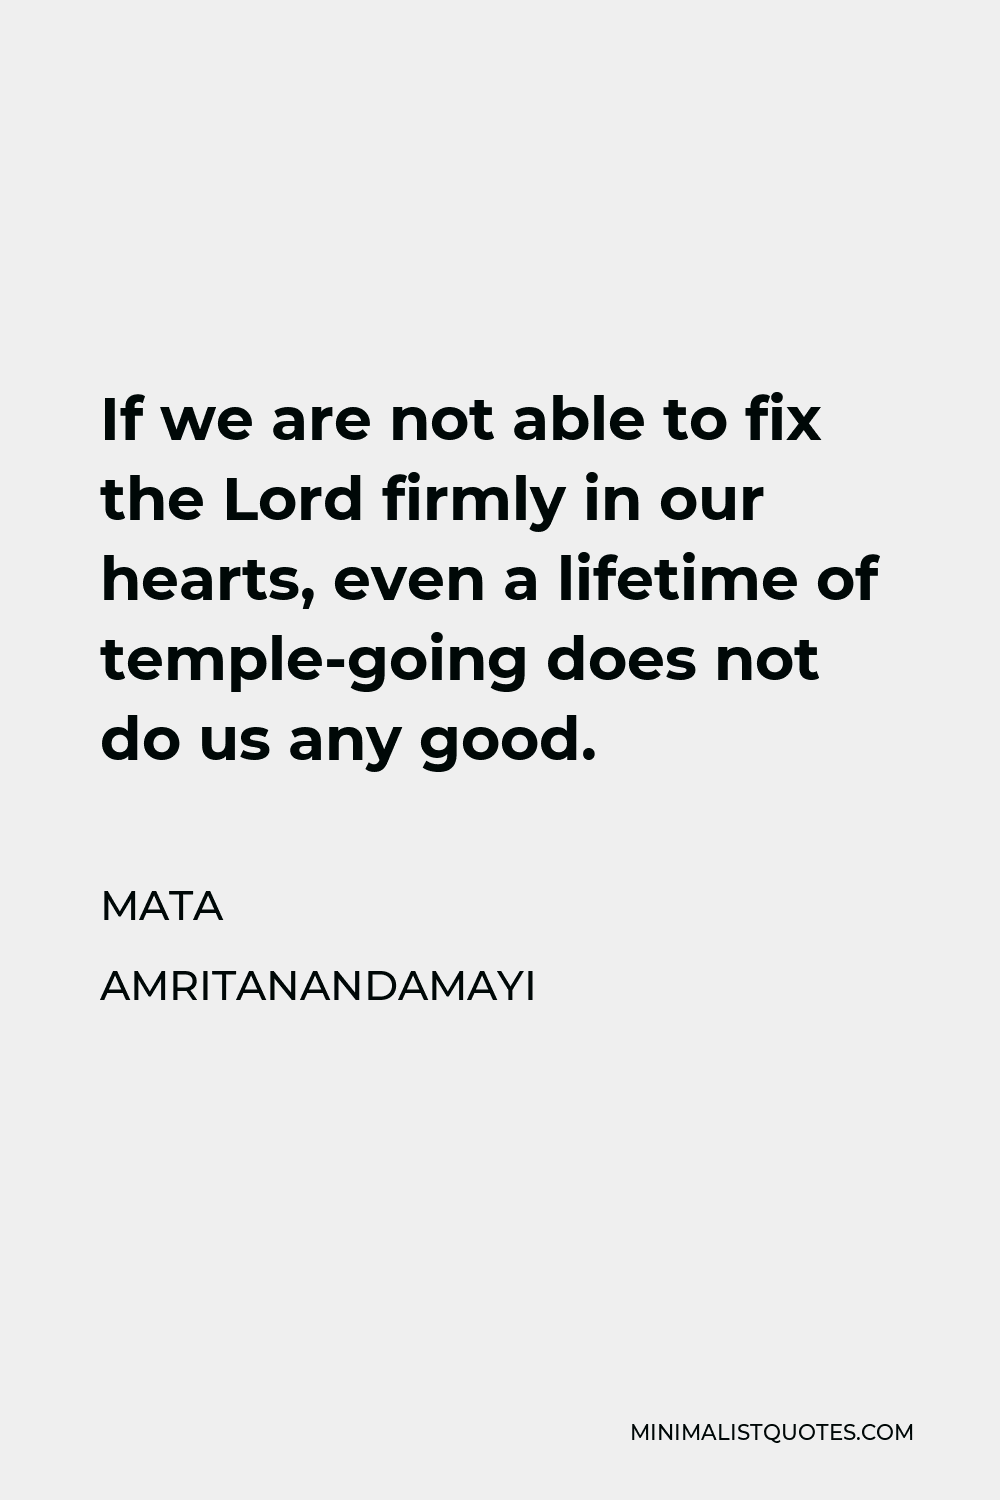 Mata Amritanandamayi Quote - If we are not able to fix the Lord firmly in our hearts, even a lifetime of temple-going does not do us any good.